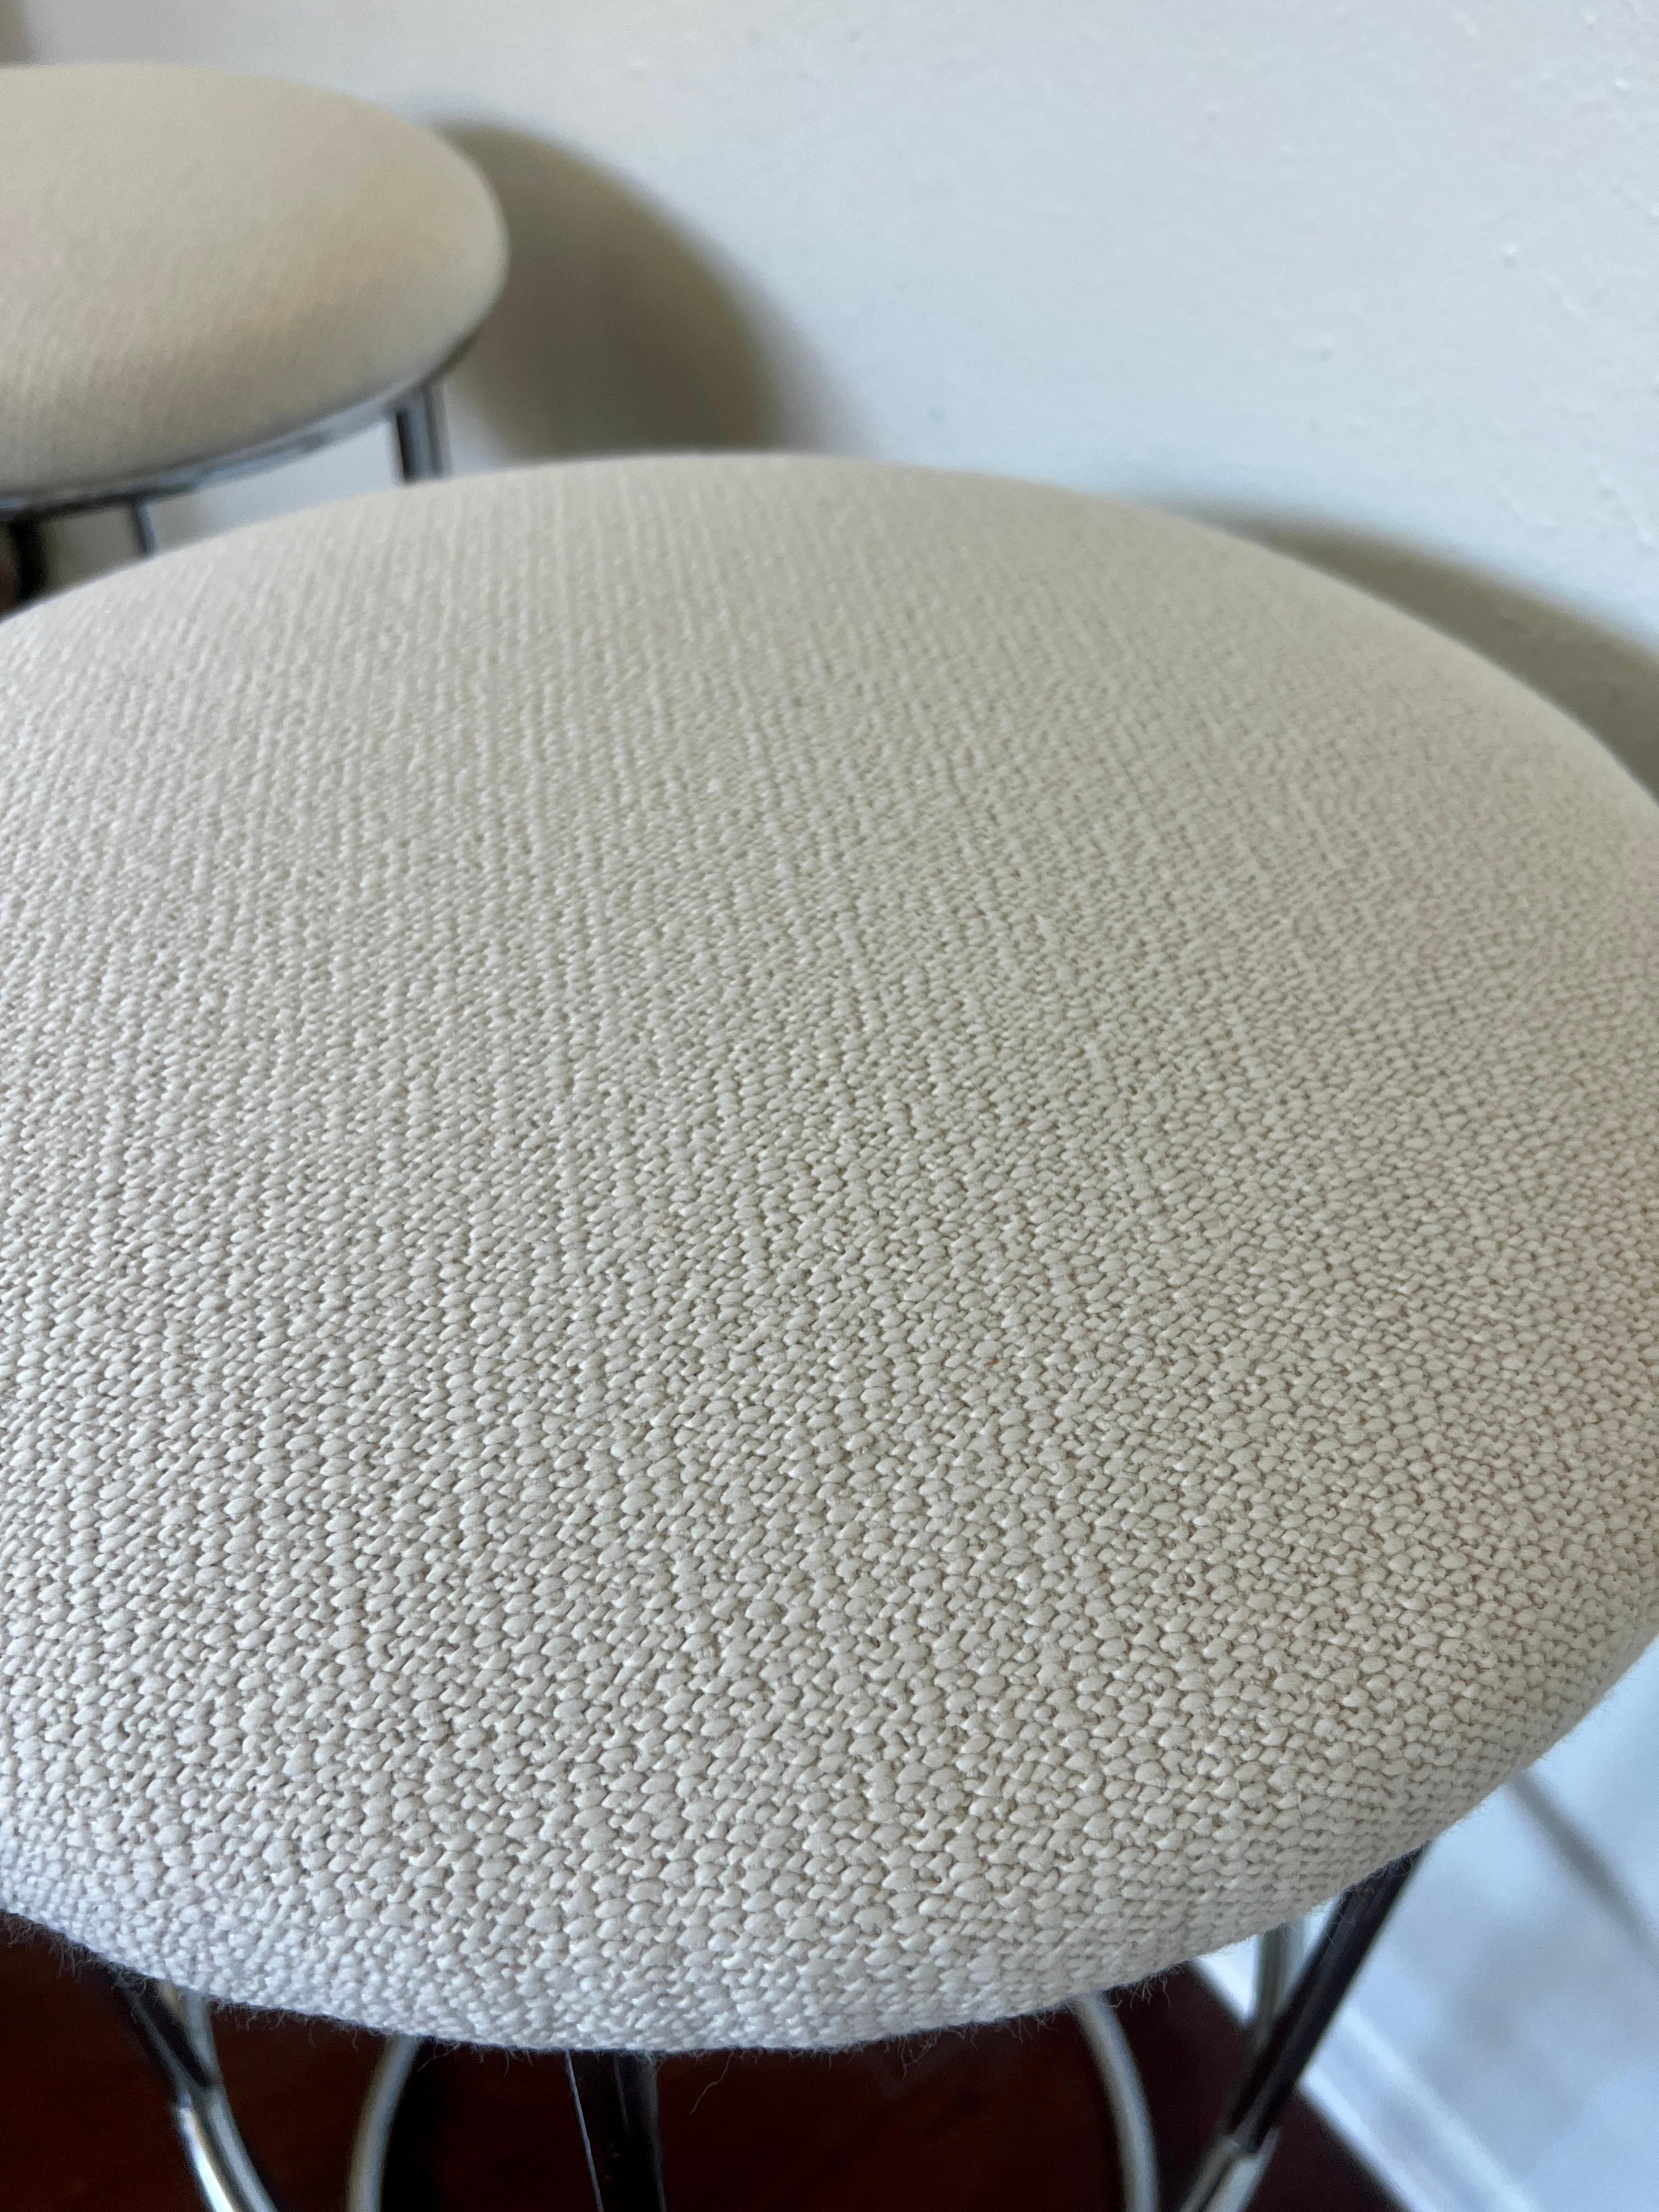 Vintage set of 3 chrome barstools newly reupholstered in an ivory boucle fabric For Sale 1